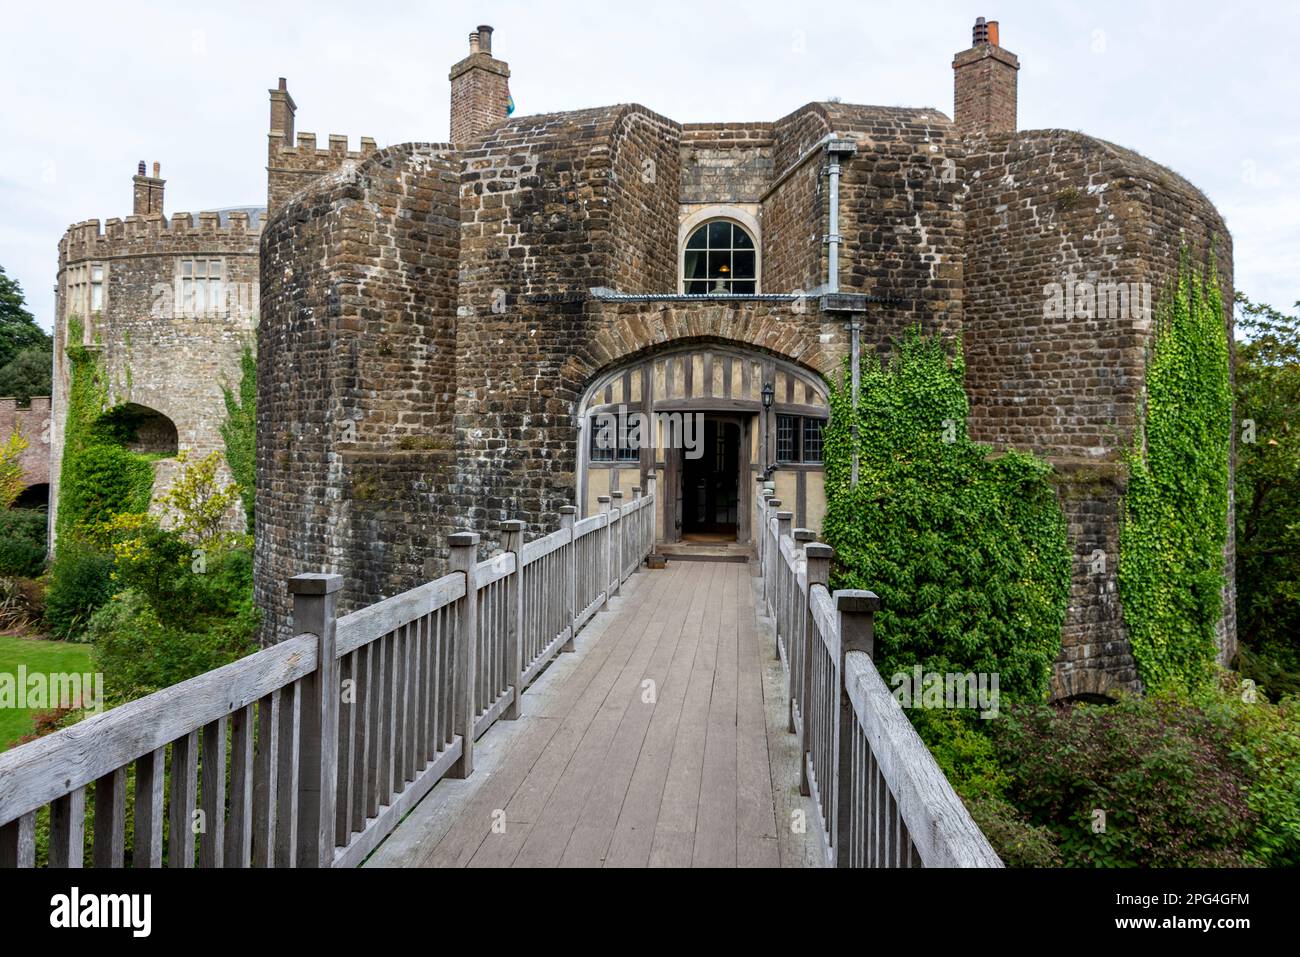 A wooden walk bridge connecting the surrounding gardens and main residence at Walmer Castle near Deal in Kent, Britain.  The castle is an artillery fo Stock Photo